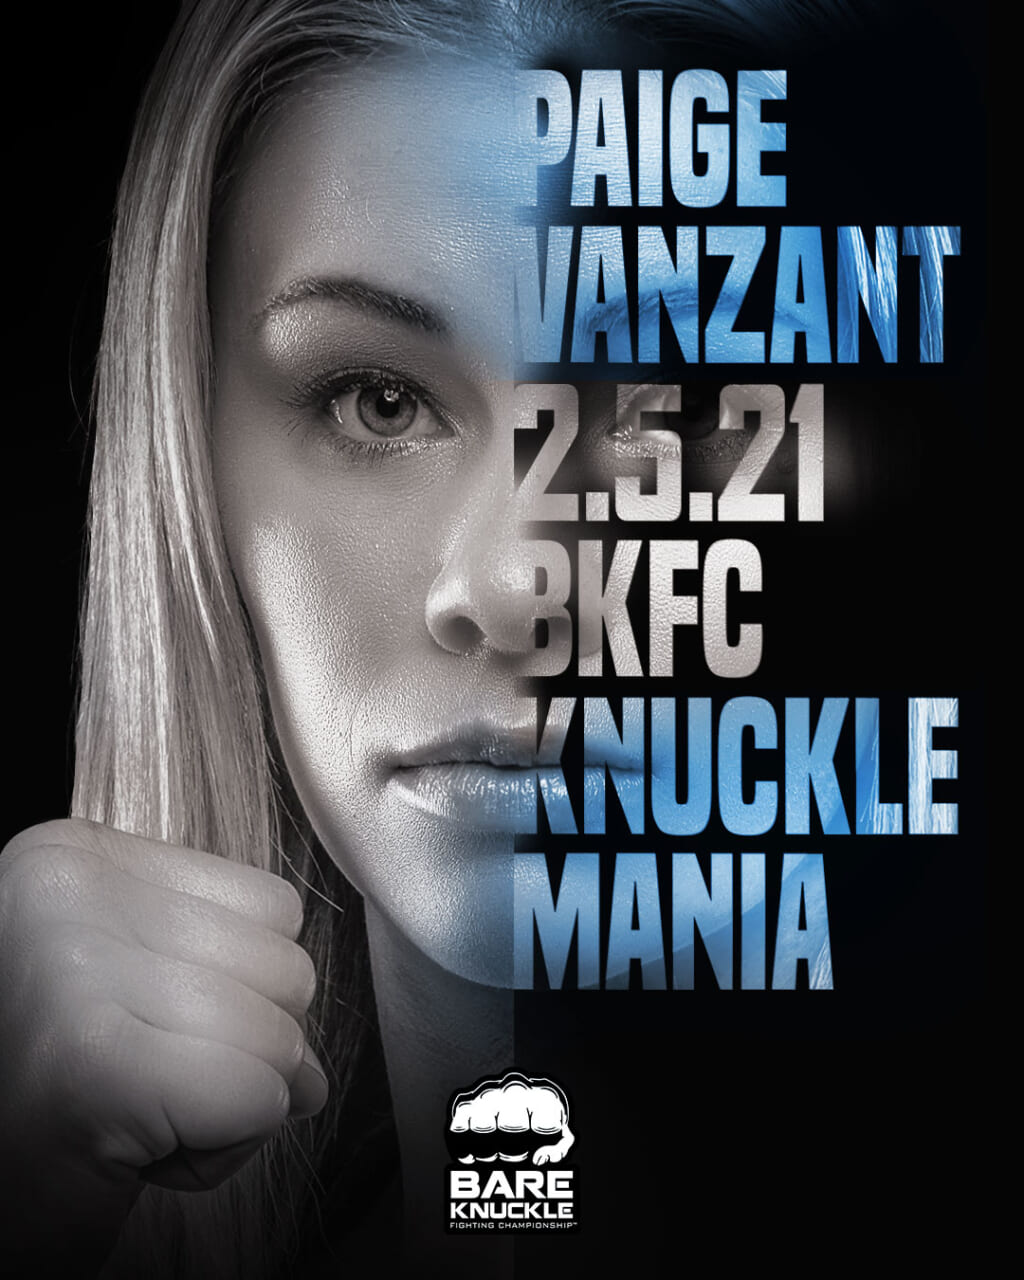 Paige VanZant on BKFC debut: I’ll shock and surprise fans